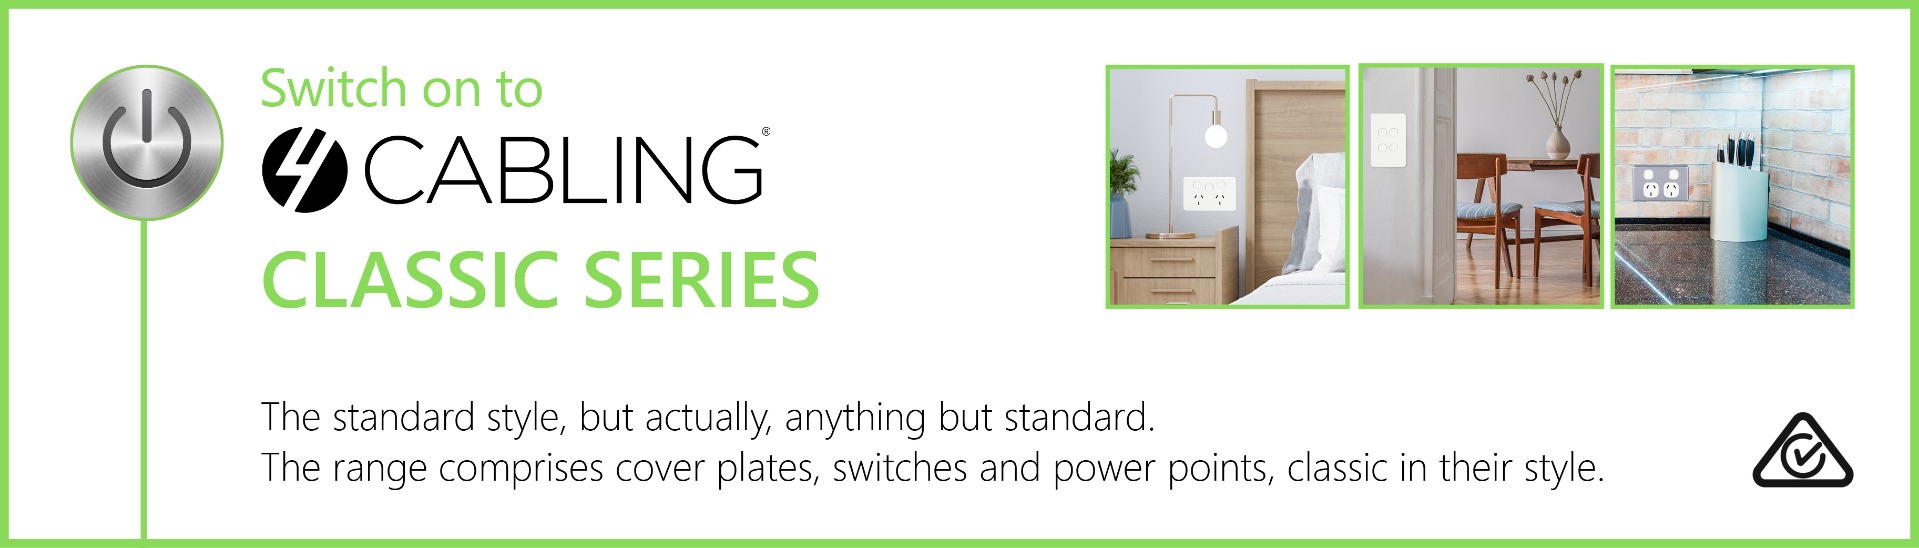 4Cabling Domestic Electrical Range - Classic Series